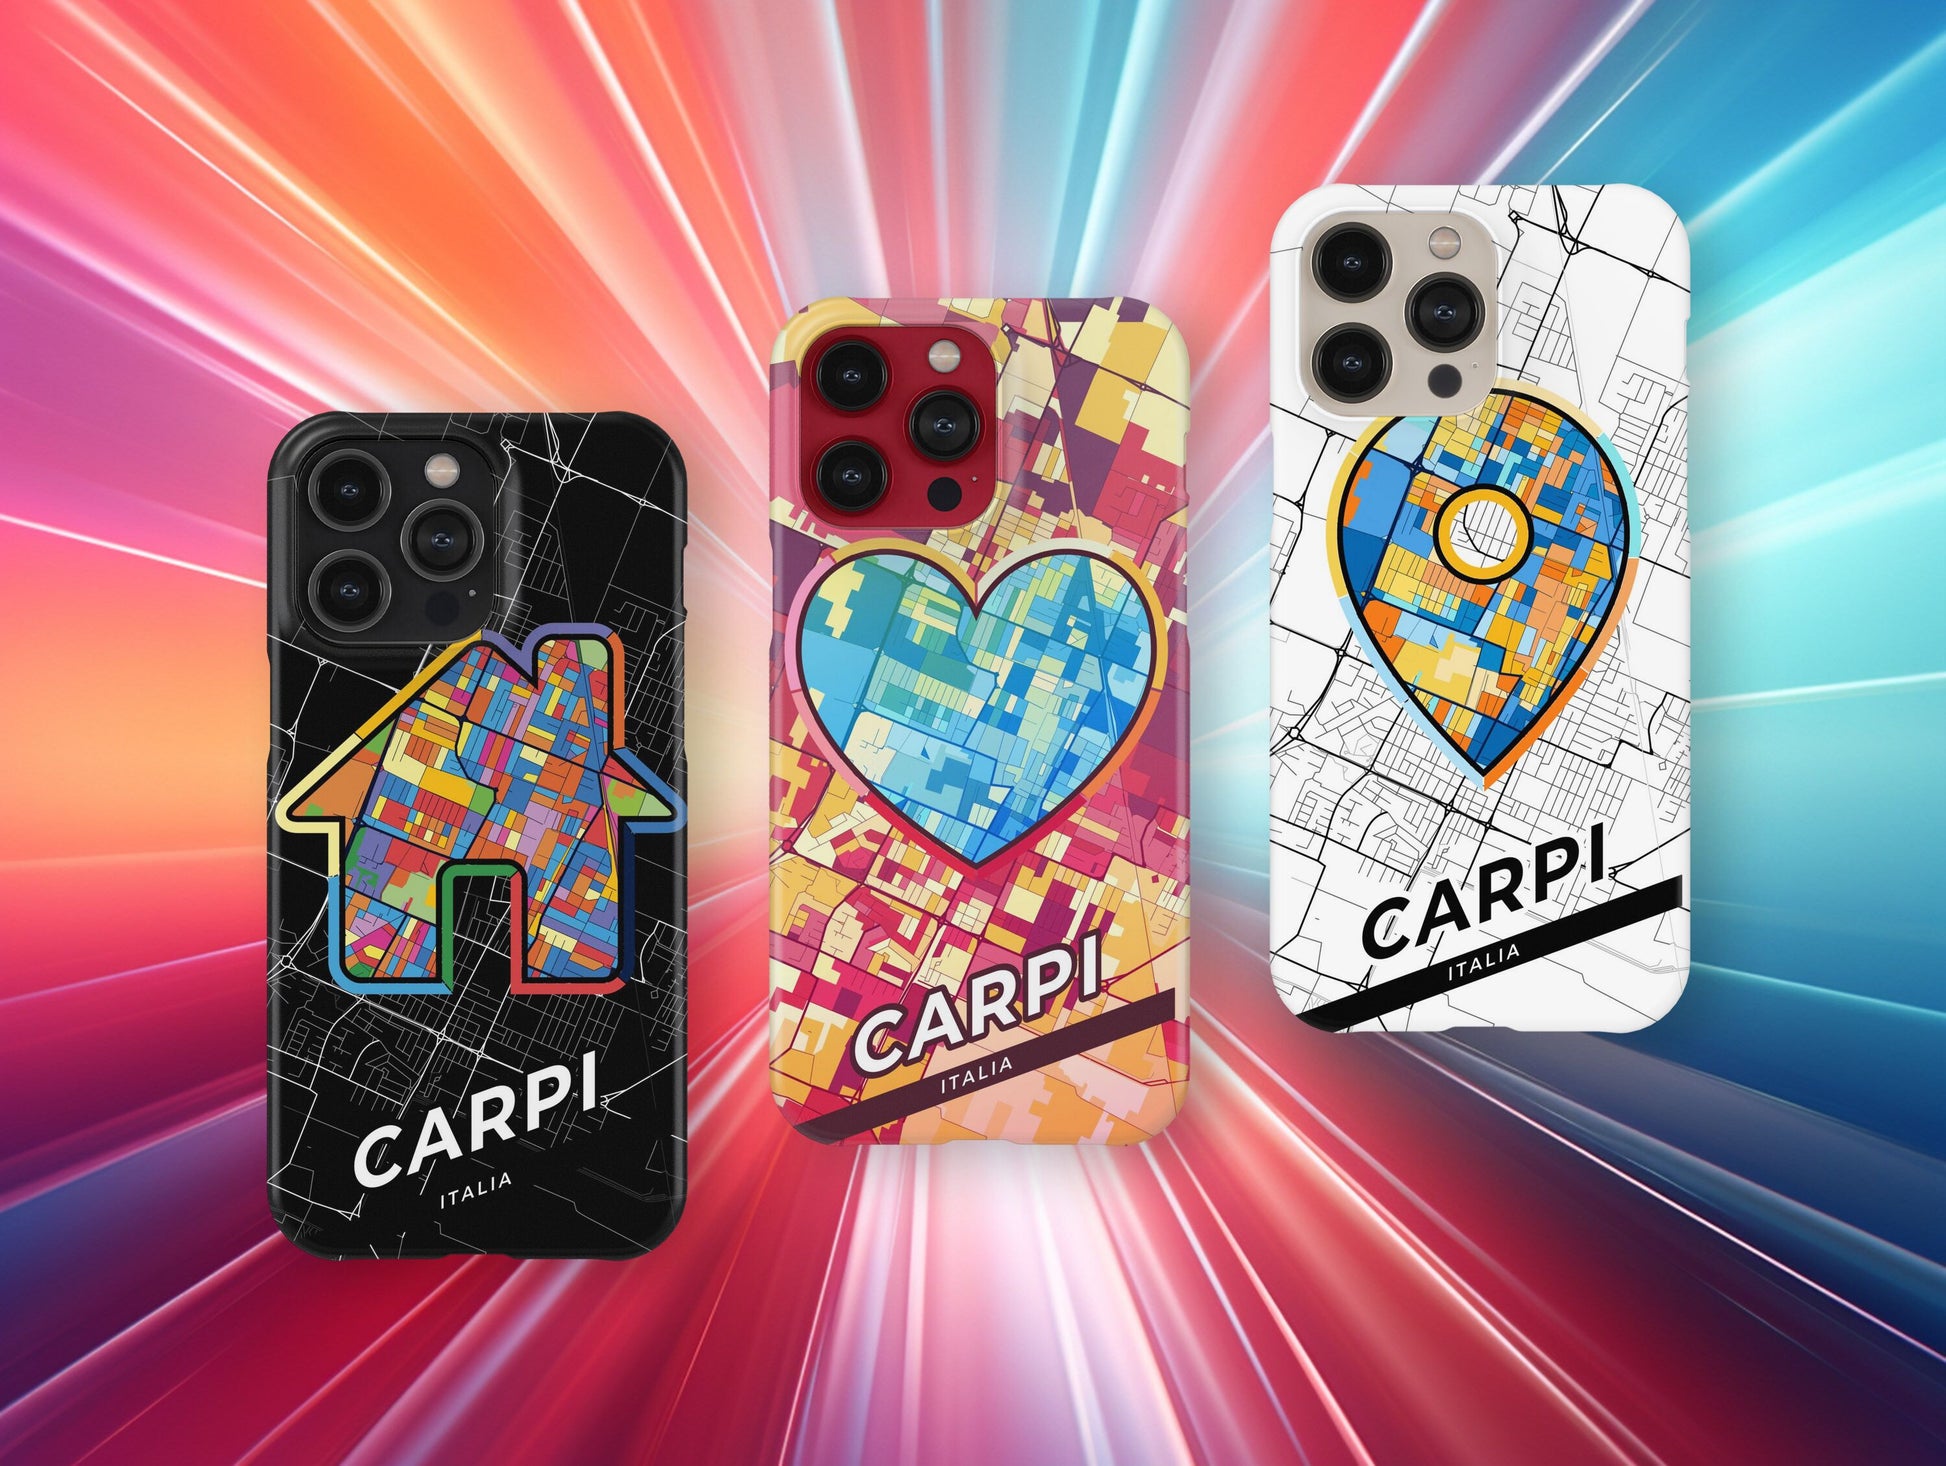 Carpi Italy slim phone case with colorful icon. Birthday, wedding or housewarming gift. Couple match cases.